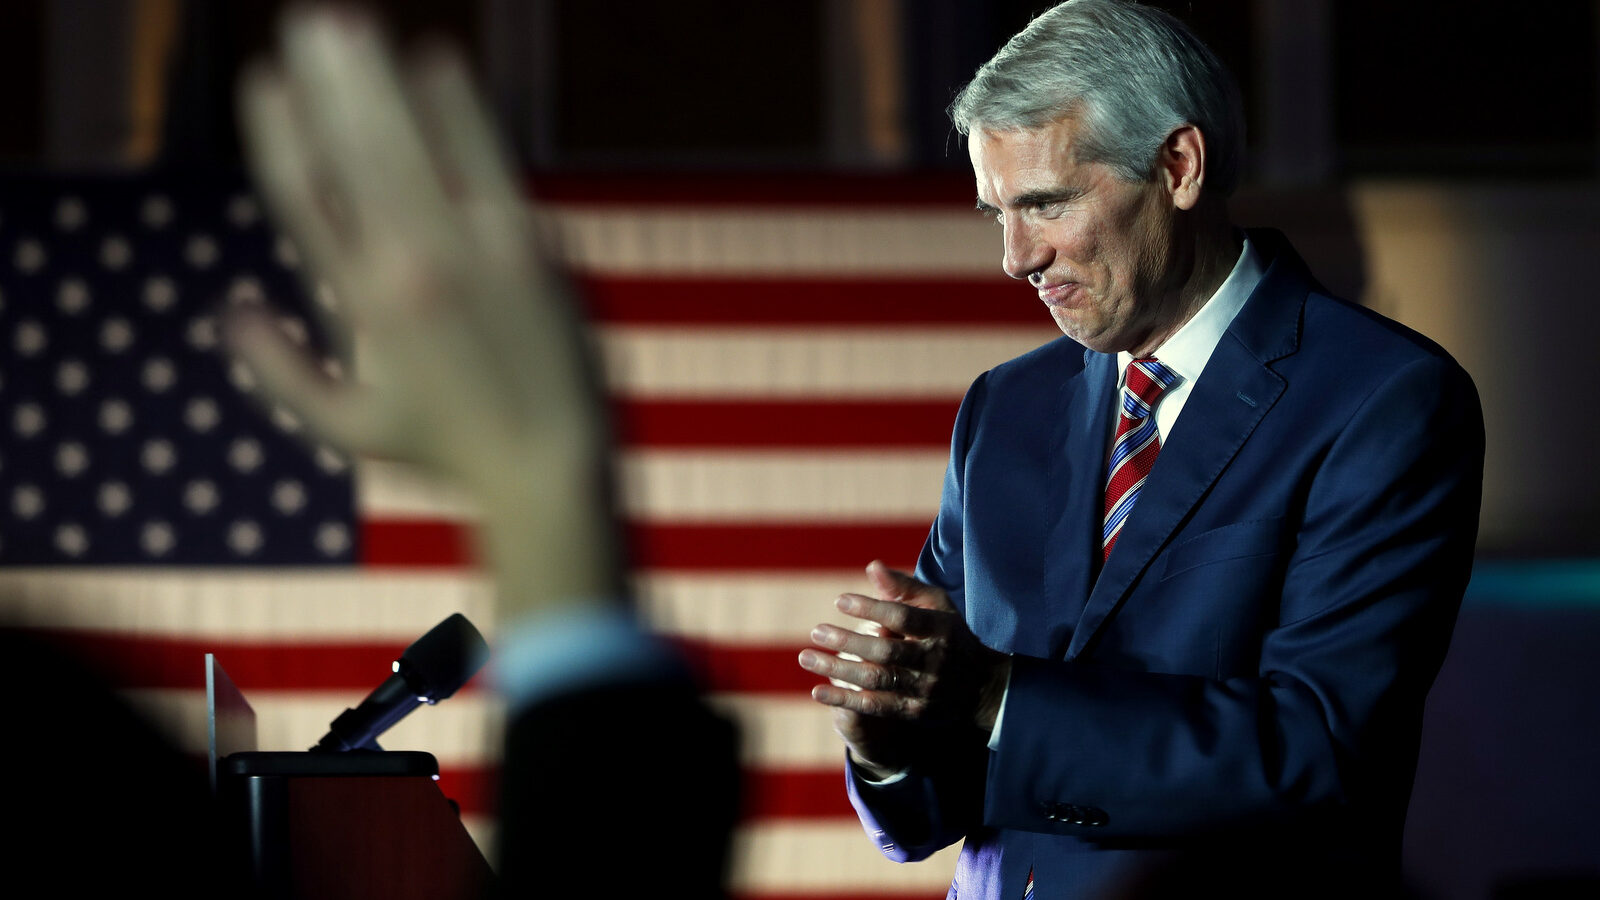 Sen. Rob Portman, R-Ohio smiles and applauds after winning re-election, Portman, along with Chris Murphy (D – CT) are behind a recent bill aimed at countering 'foreign propaganda'. (AP Photo/John Minchillo)